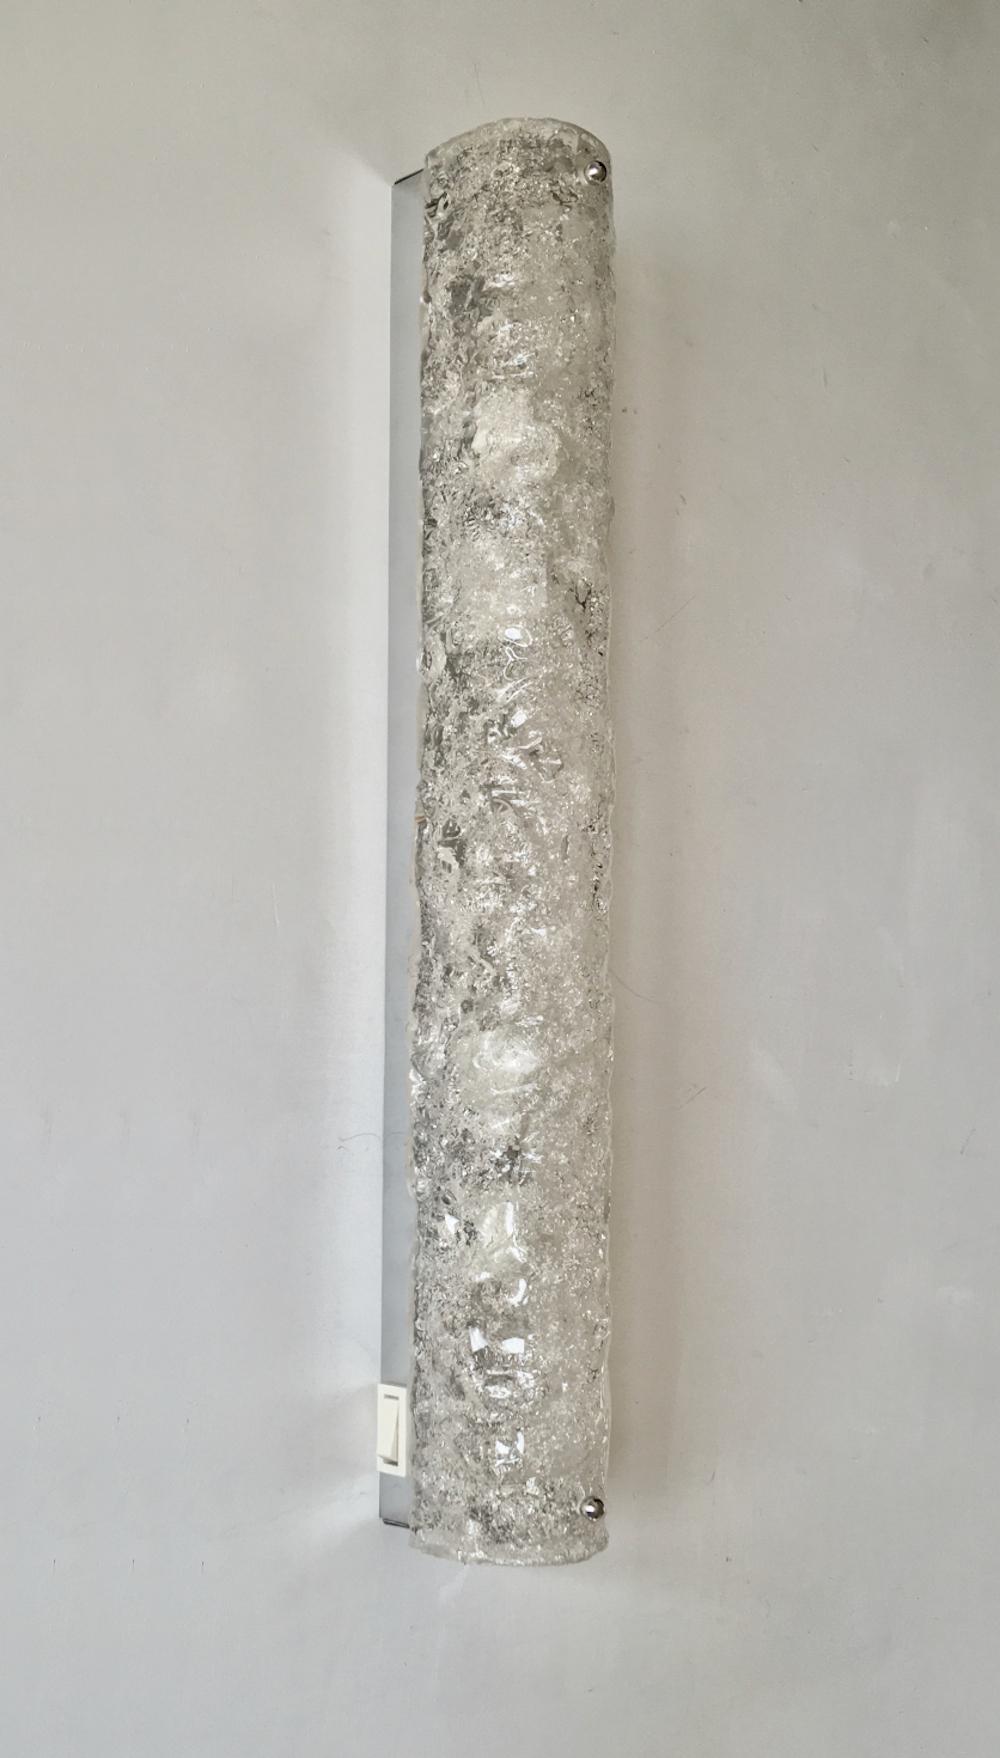 Long, slim ice glass sconce by Hillebrand, Germany, 1960s. 

Curved glass shade of bubbled and textured glass over a silver-coloured chrome back plate. White switch to one side. In the main image, natural light is coming through the glass.

The